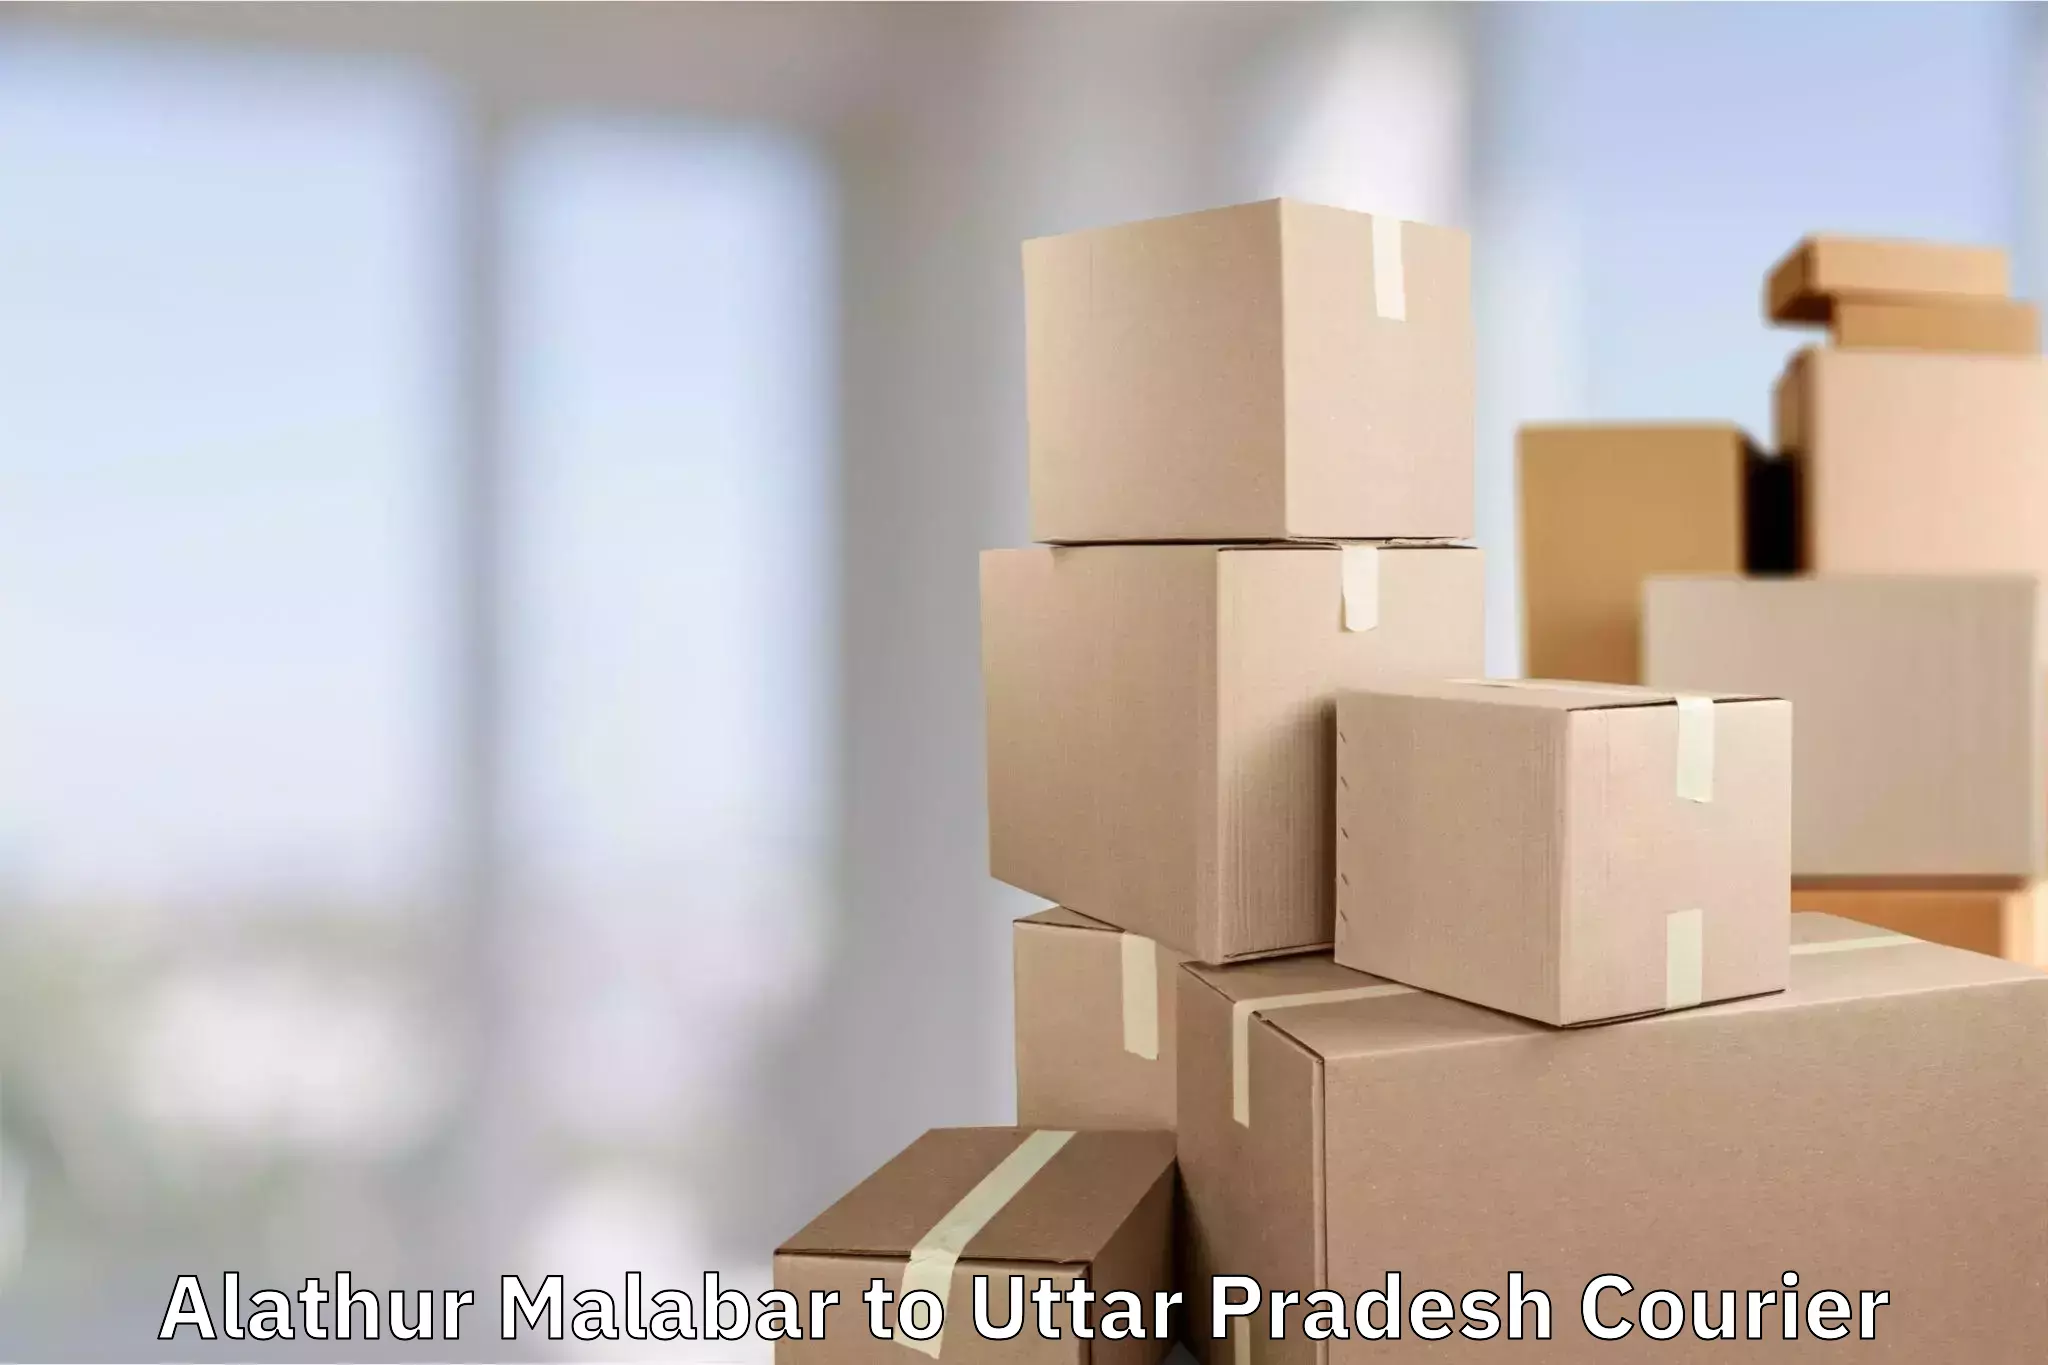 Scheduled baggage courier Alathur Malabar to Agra